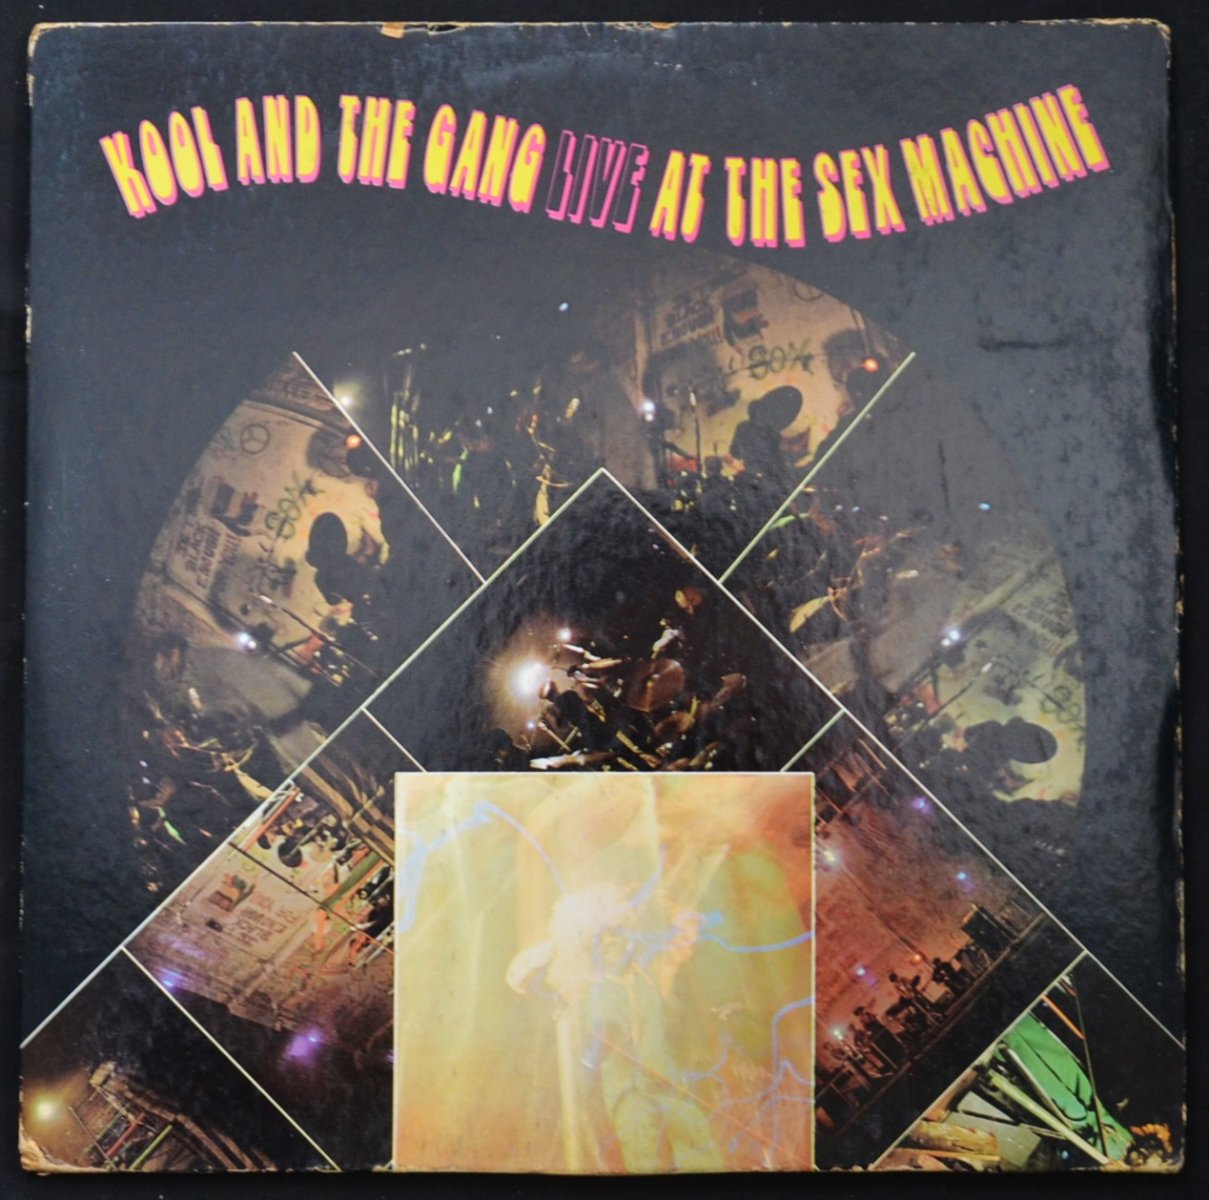 KOOL AND THE GANG / LIVE AT THE SEX MACHINE (LP)